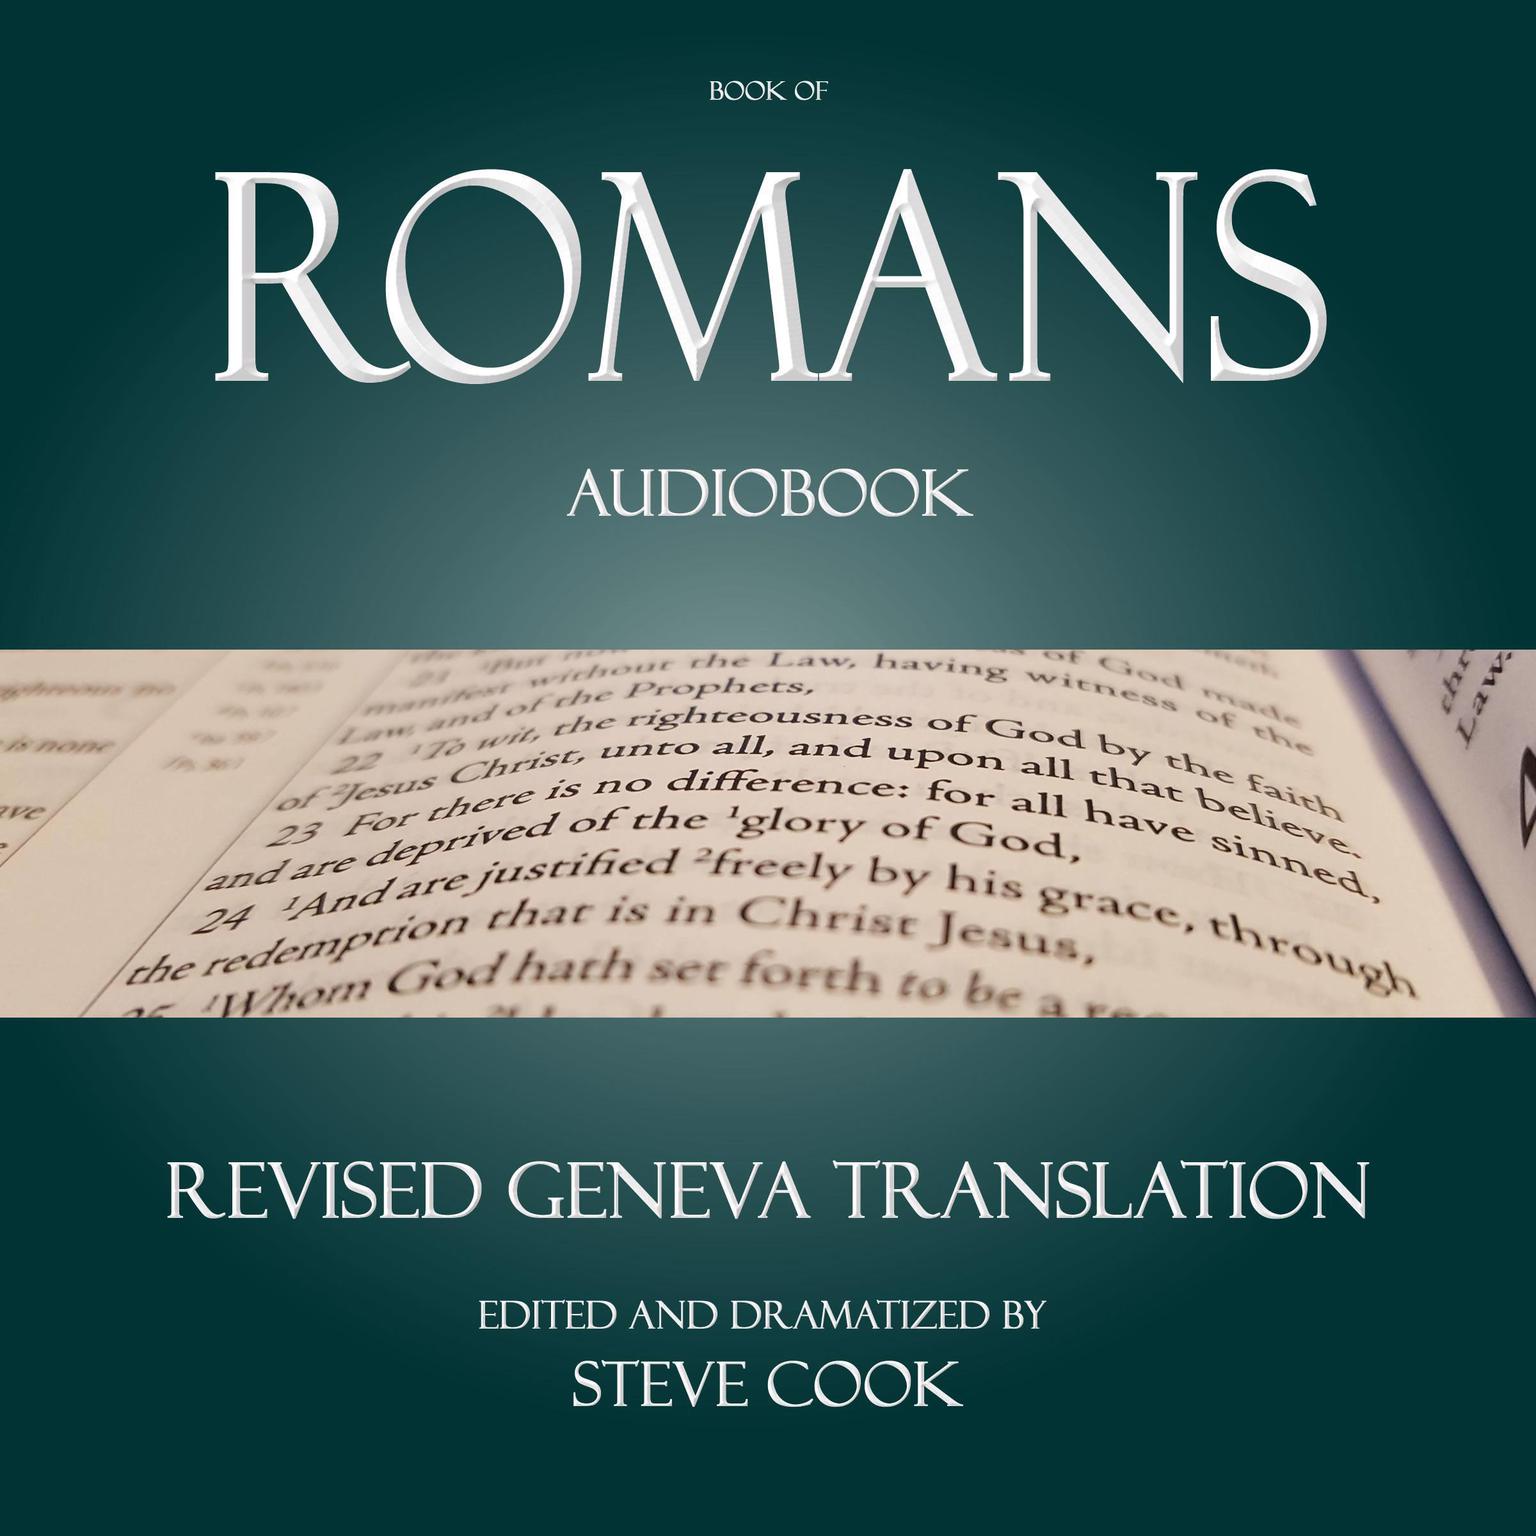 Book of Romans Audiobook: From The Revised Geneva Translation: From The Revised Geneva Translation Audiobook, by The Apostle Paul